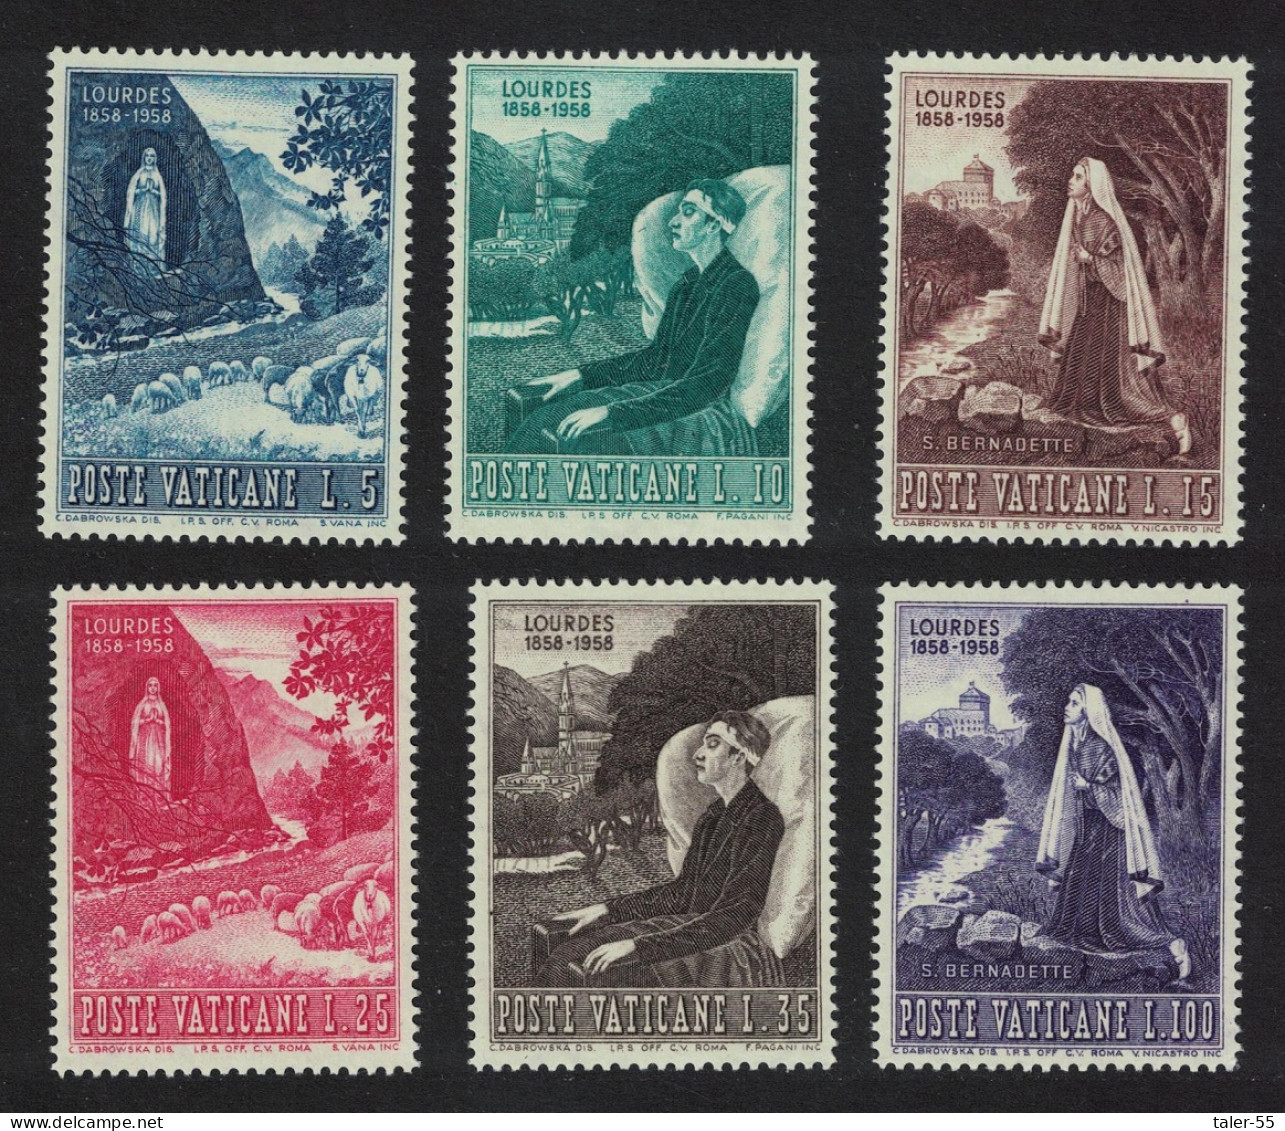 Vatican Apparition Of The Virgin Mary At Lourdes 6v 1958 MH SG#265-270 Sc#233-238 - Unused Stamps